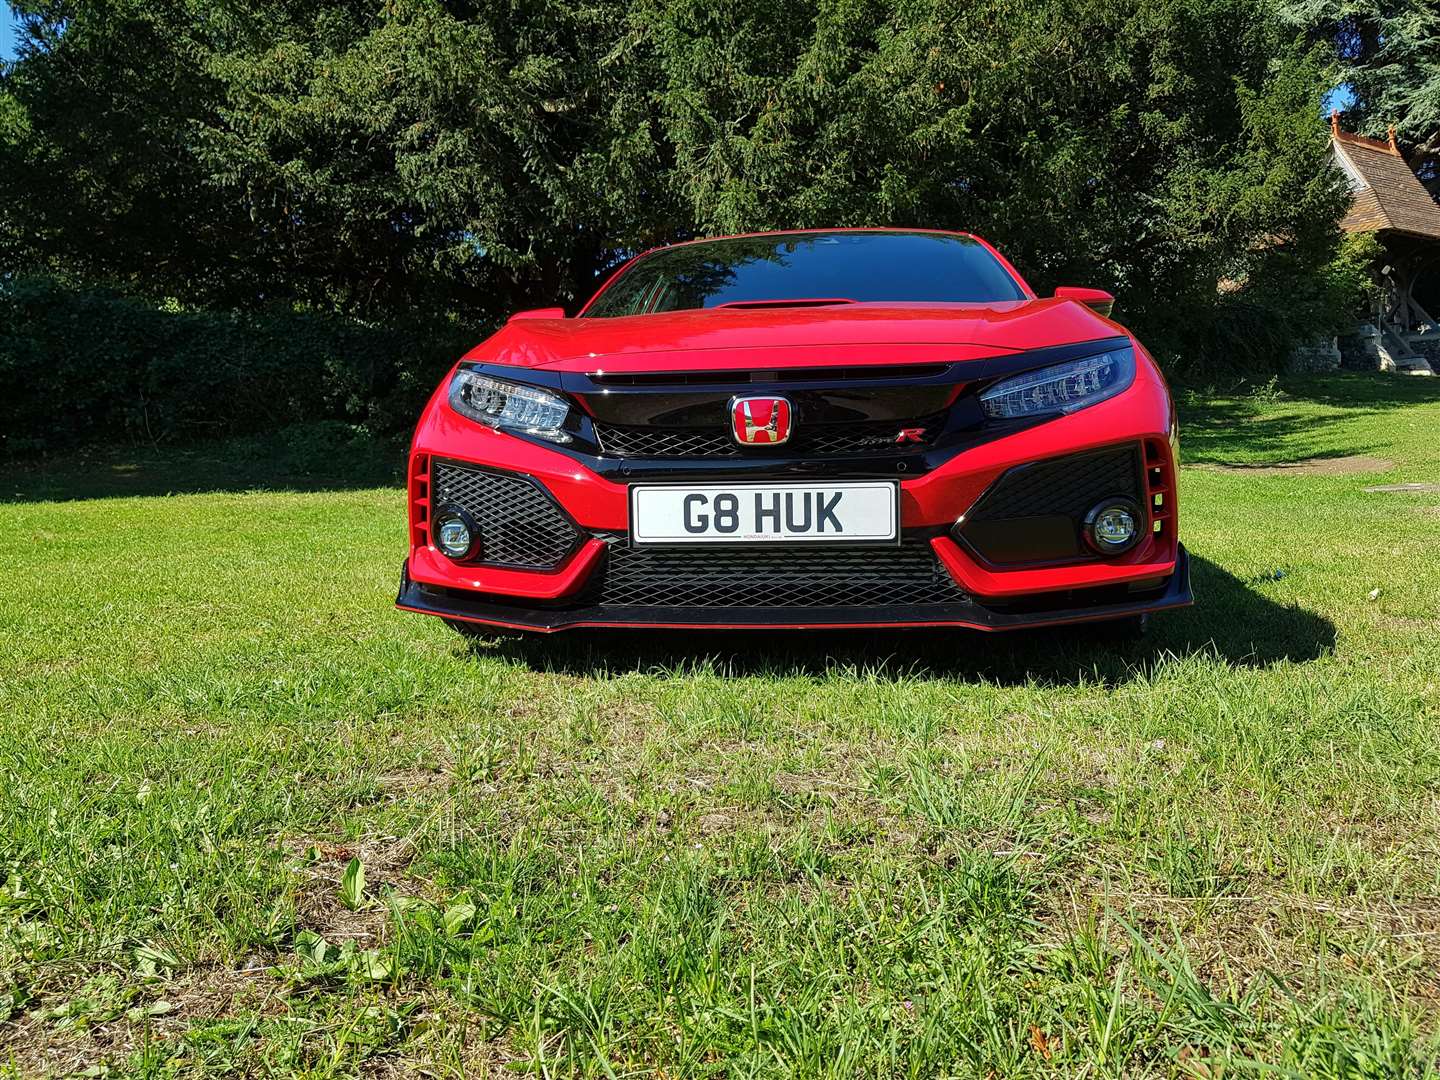 The Type R retains its aggressive styling (4041651)